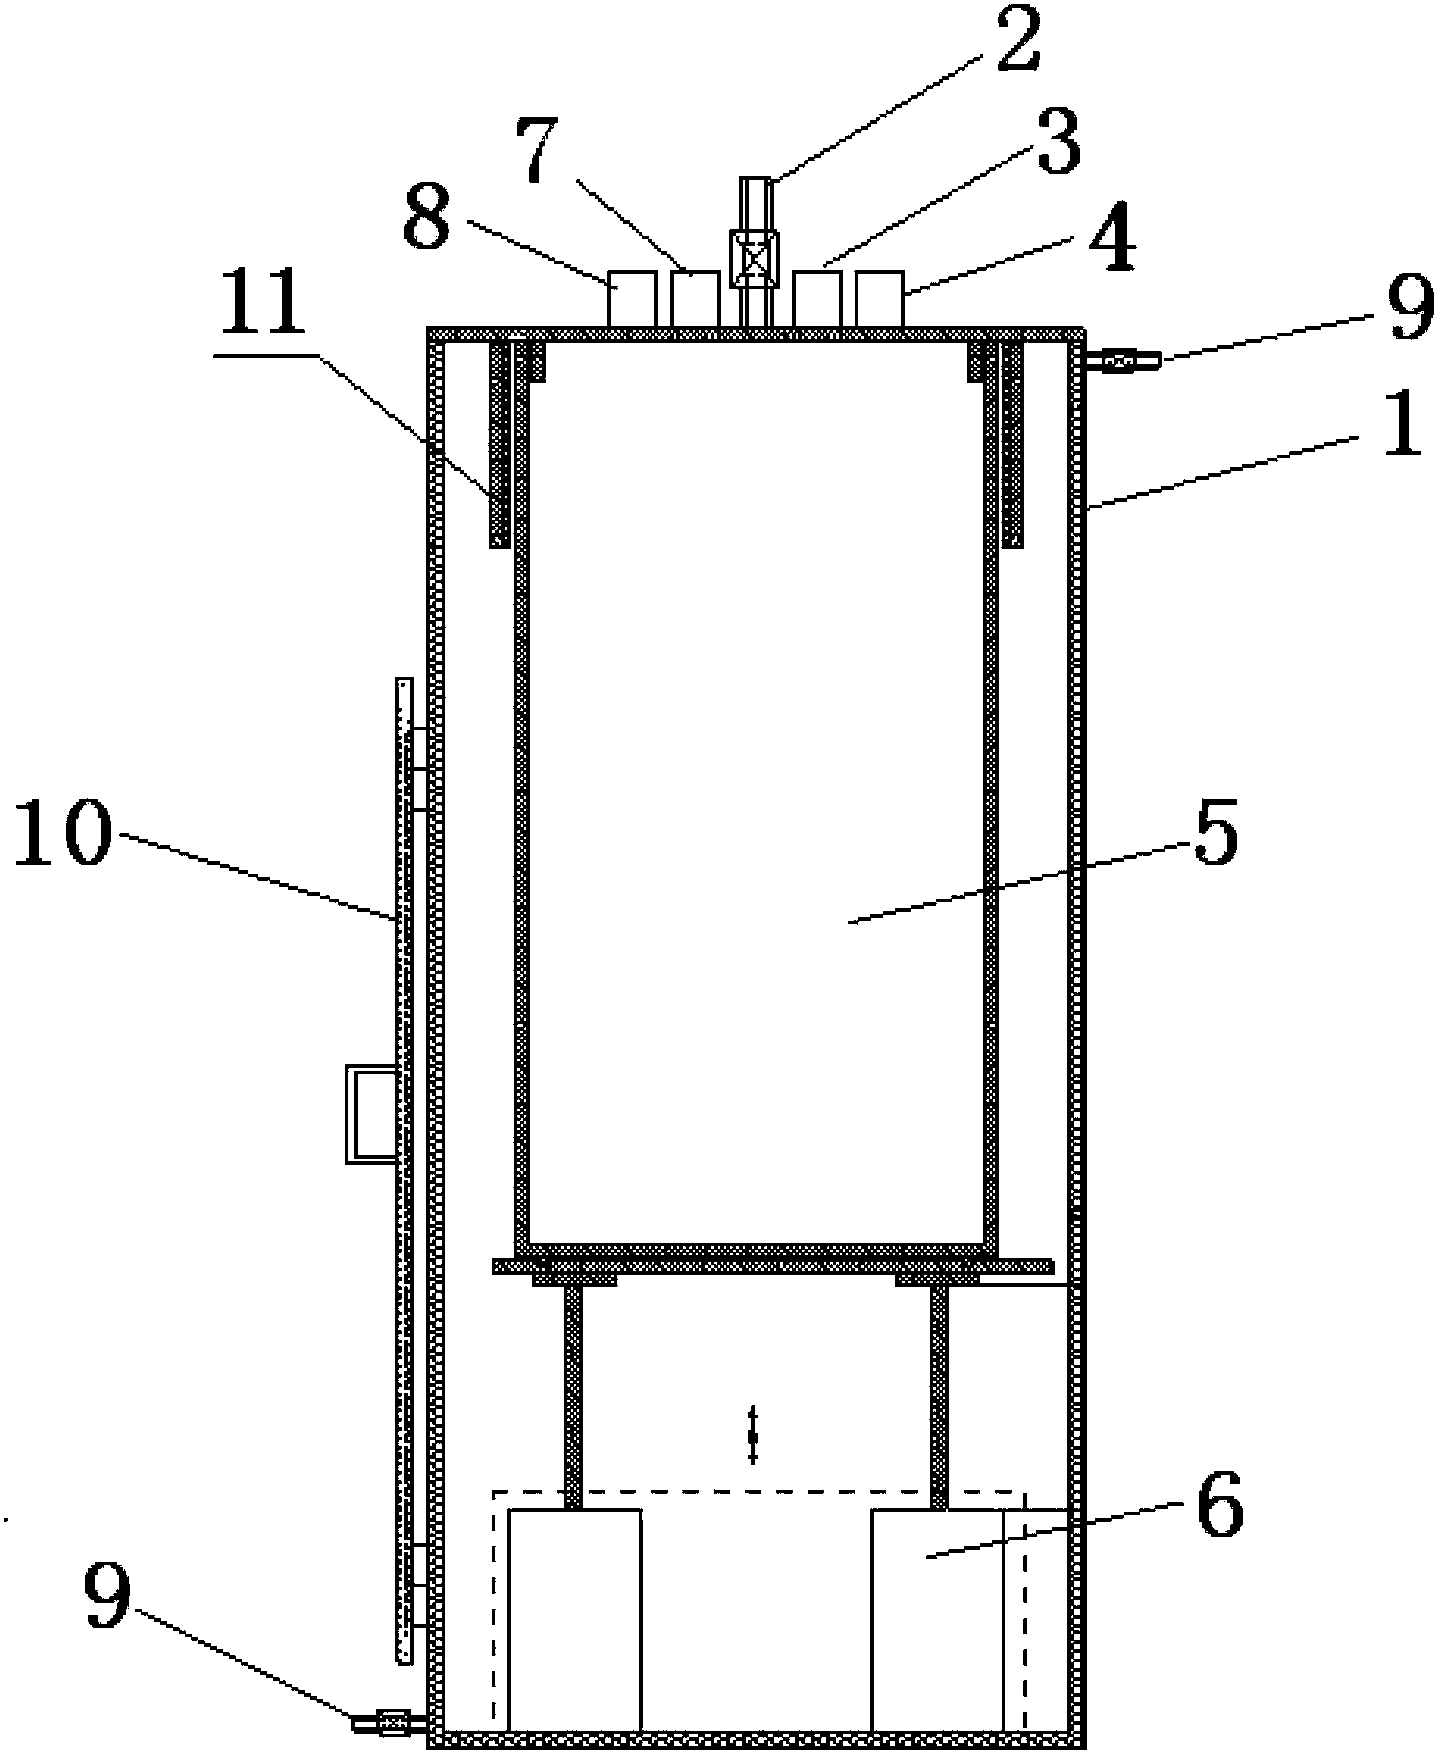 Method and device for drying radioactive waste ion exchange resin using microwaves in barrel